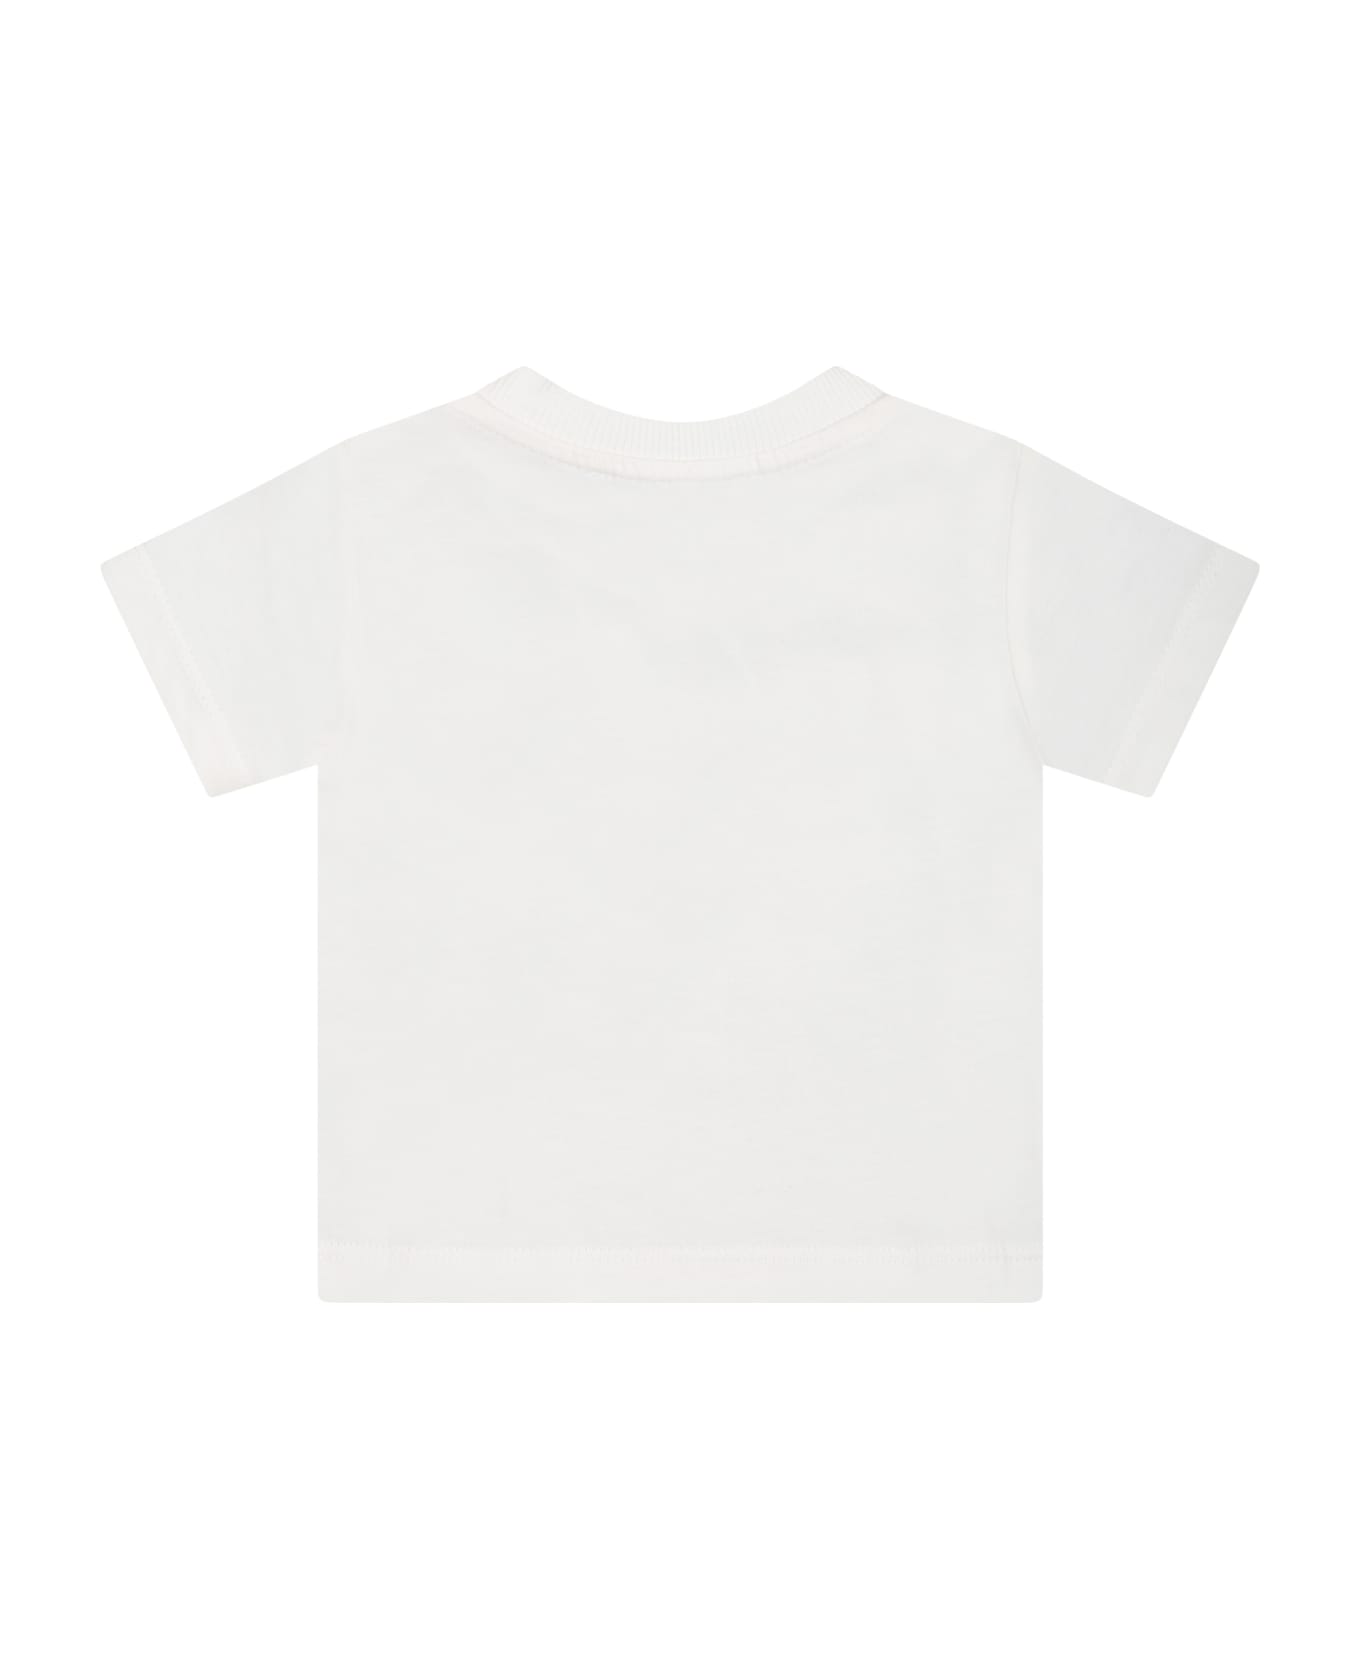 Moschino White T-shirt For Baby Kids With Teddy Bear - White Tシャツ＆ポロシャツ